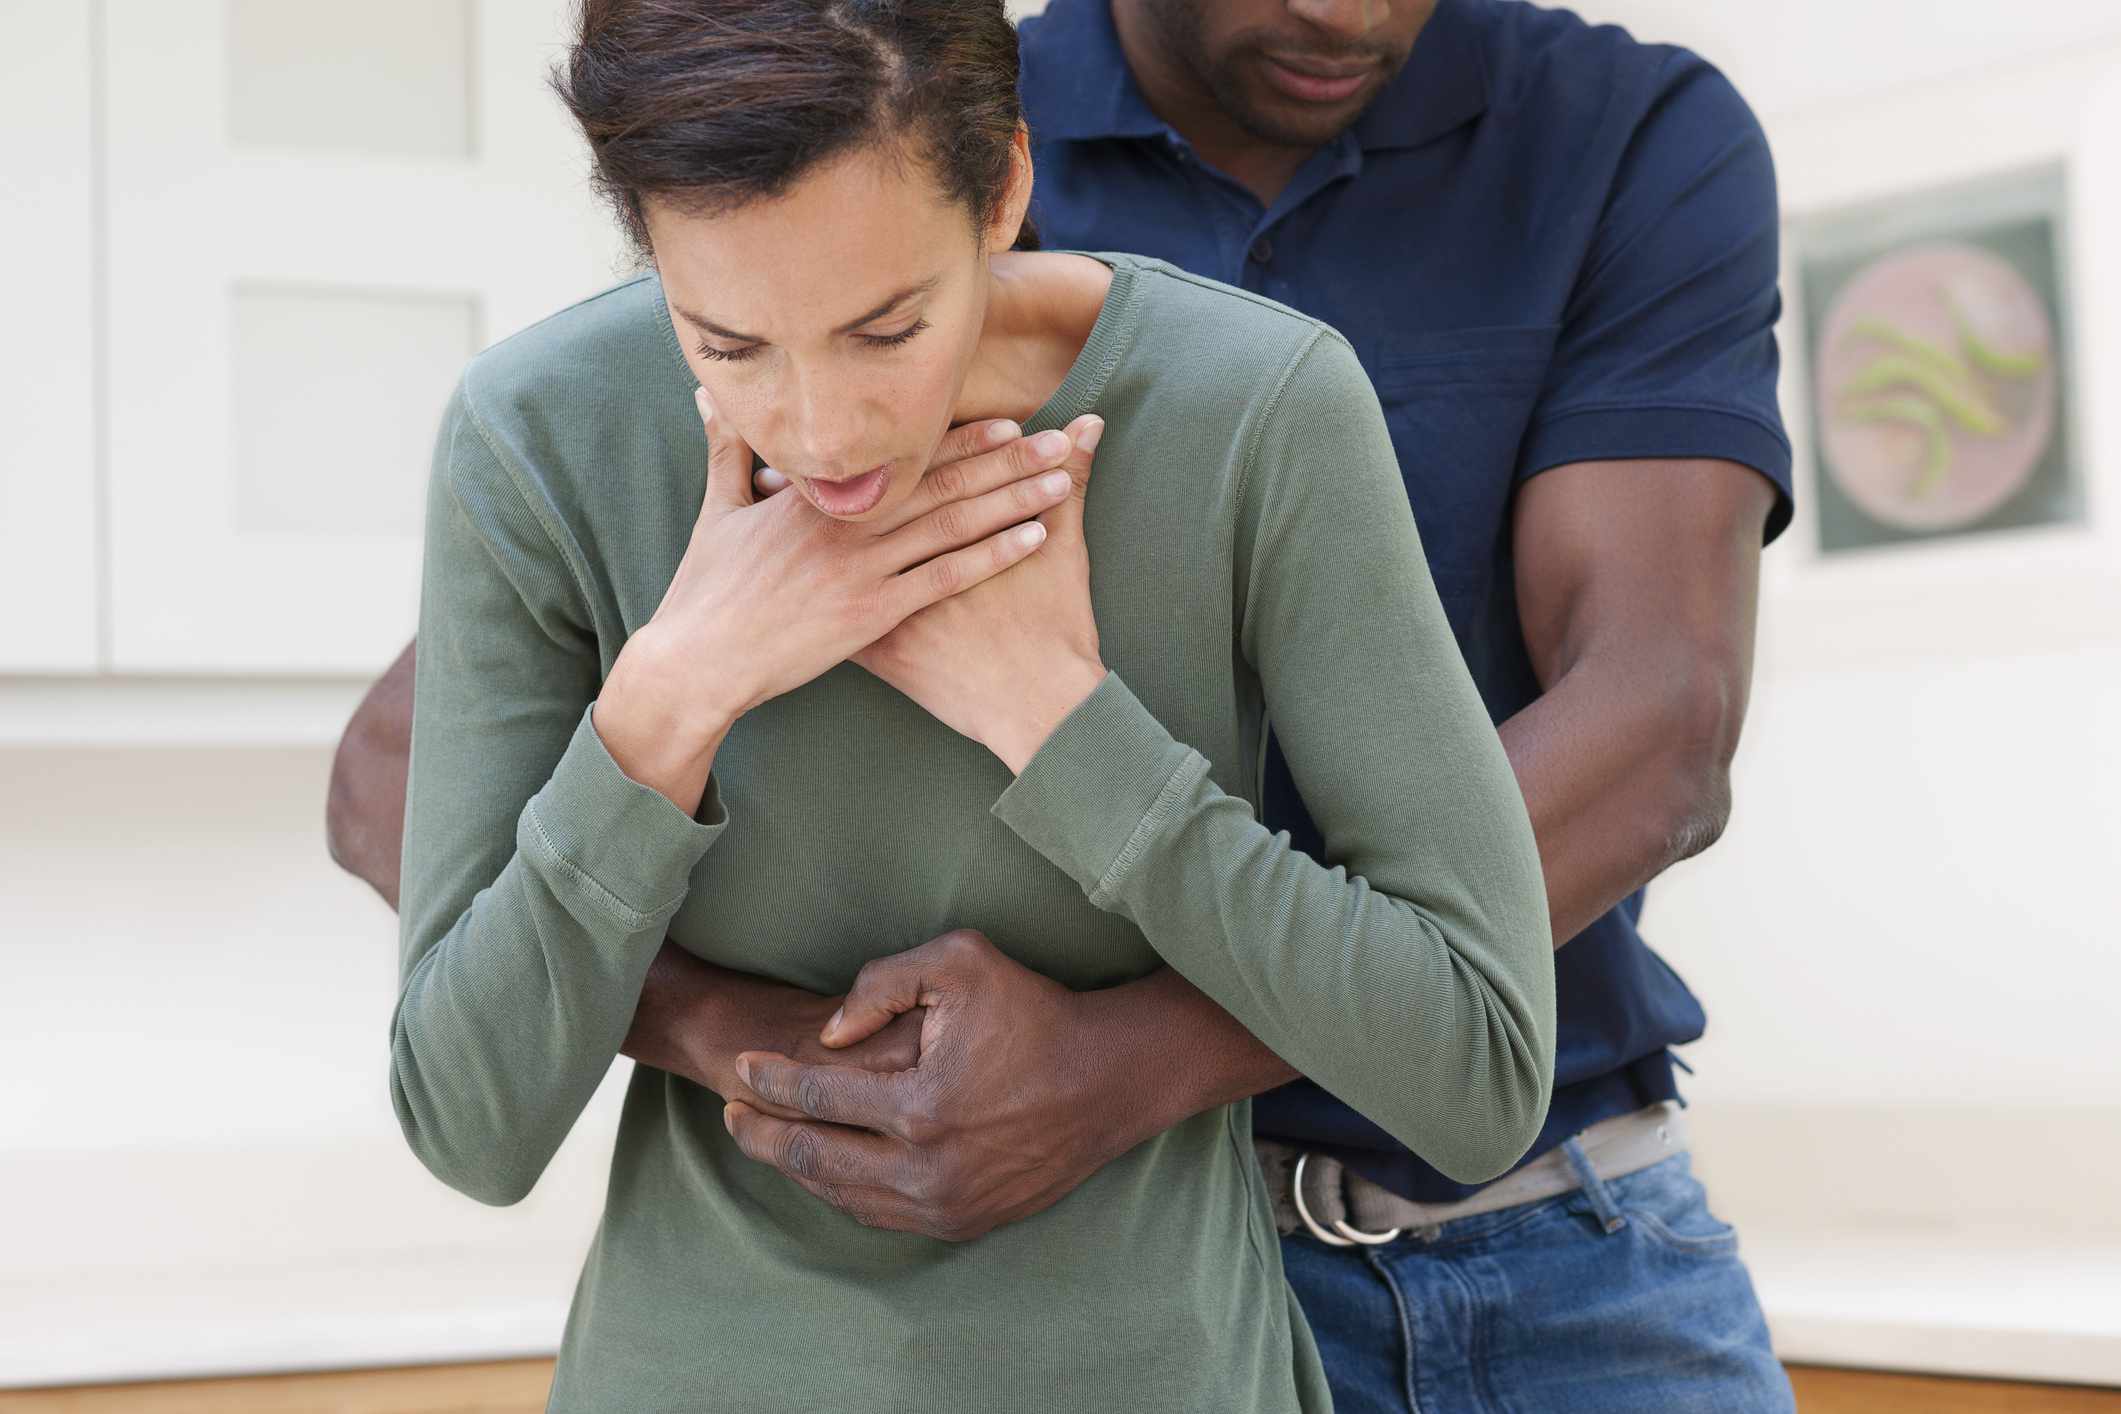 Basic Facts people don't know - heimlich maneuver